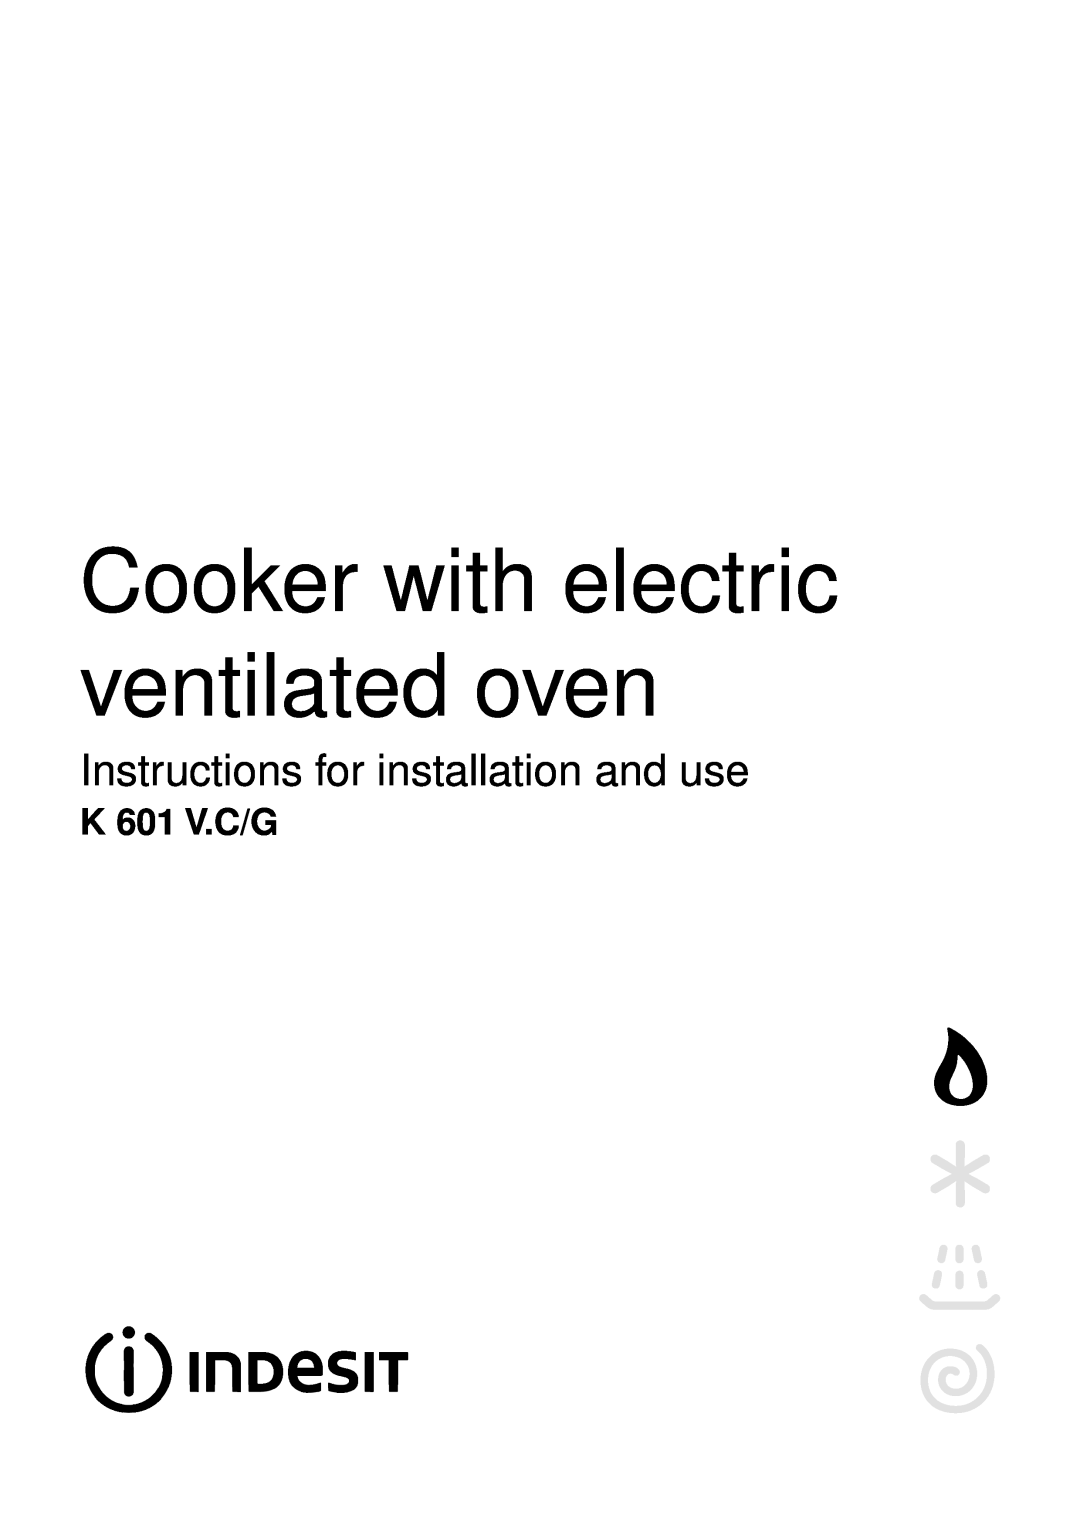 Indesit K 601 V.C/G manual Cooker with electric ventilated oven, Instructions for installation and use 